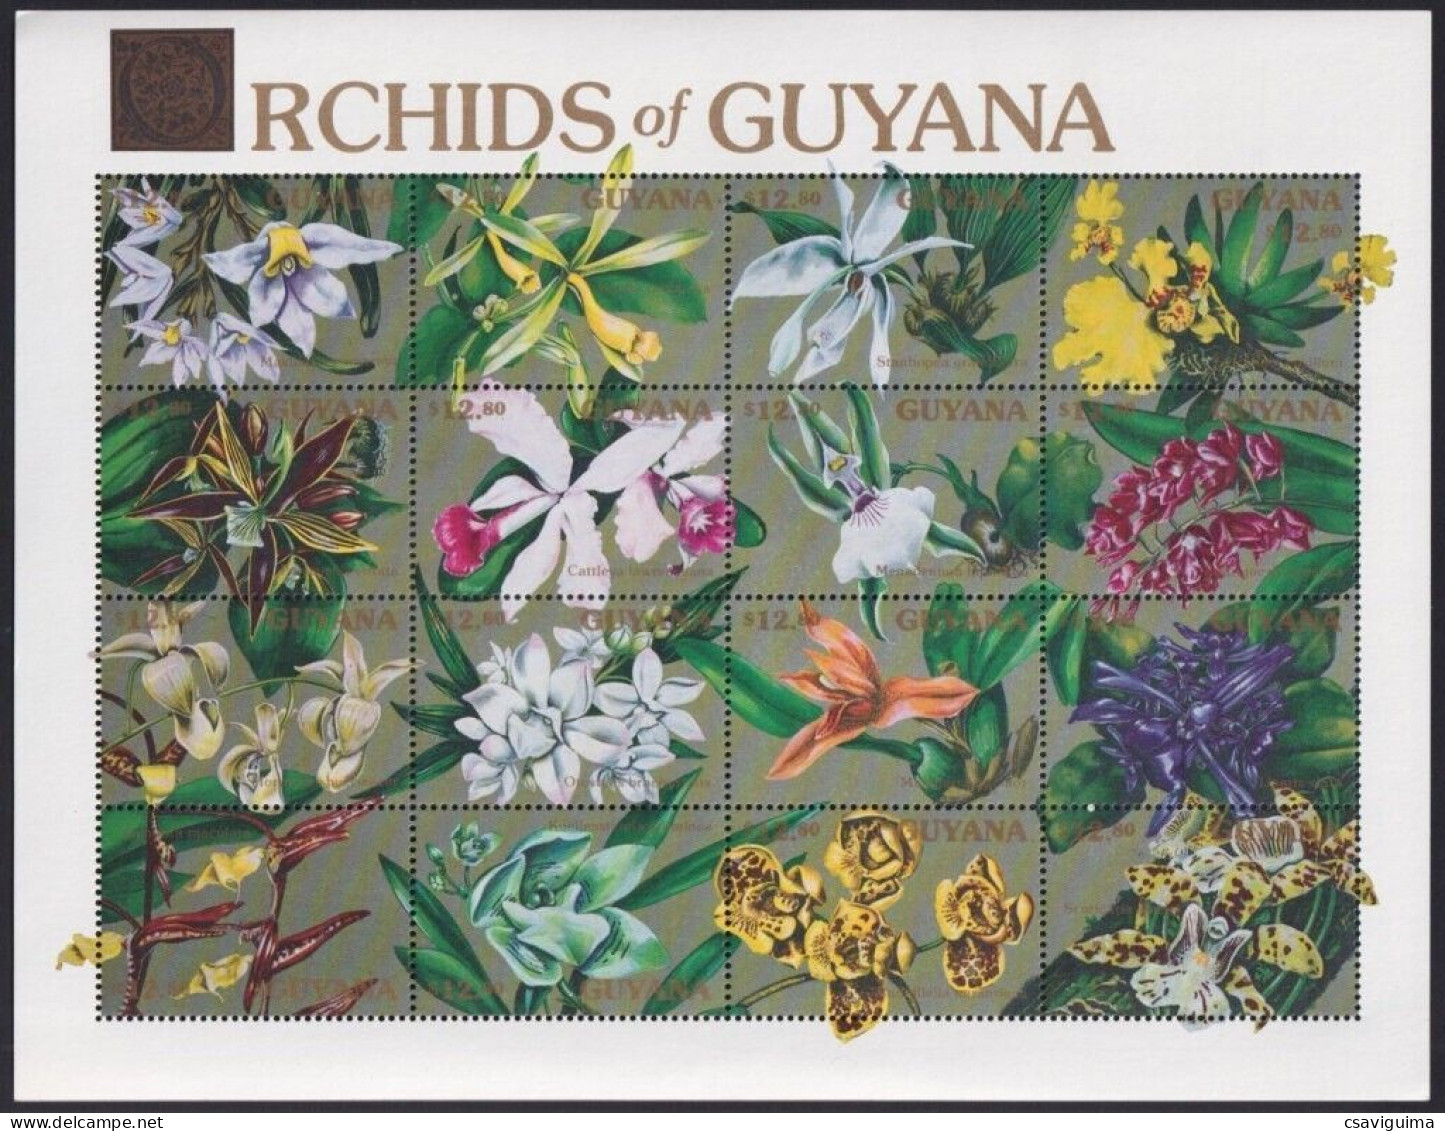 Guyana - 1991 - Flowers: Orchids Of Guyana - Yv 2651/66 - Orchidées